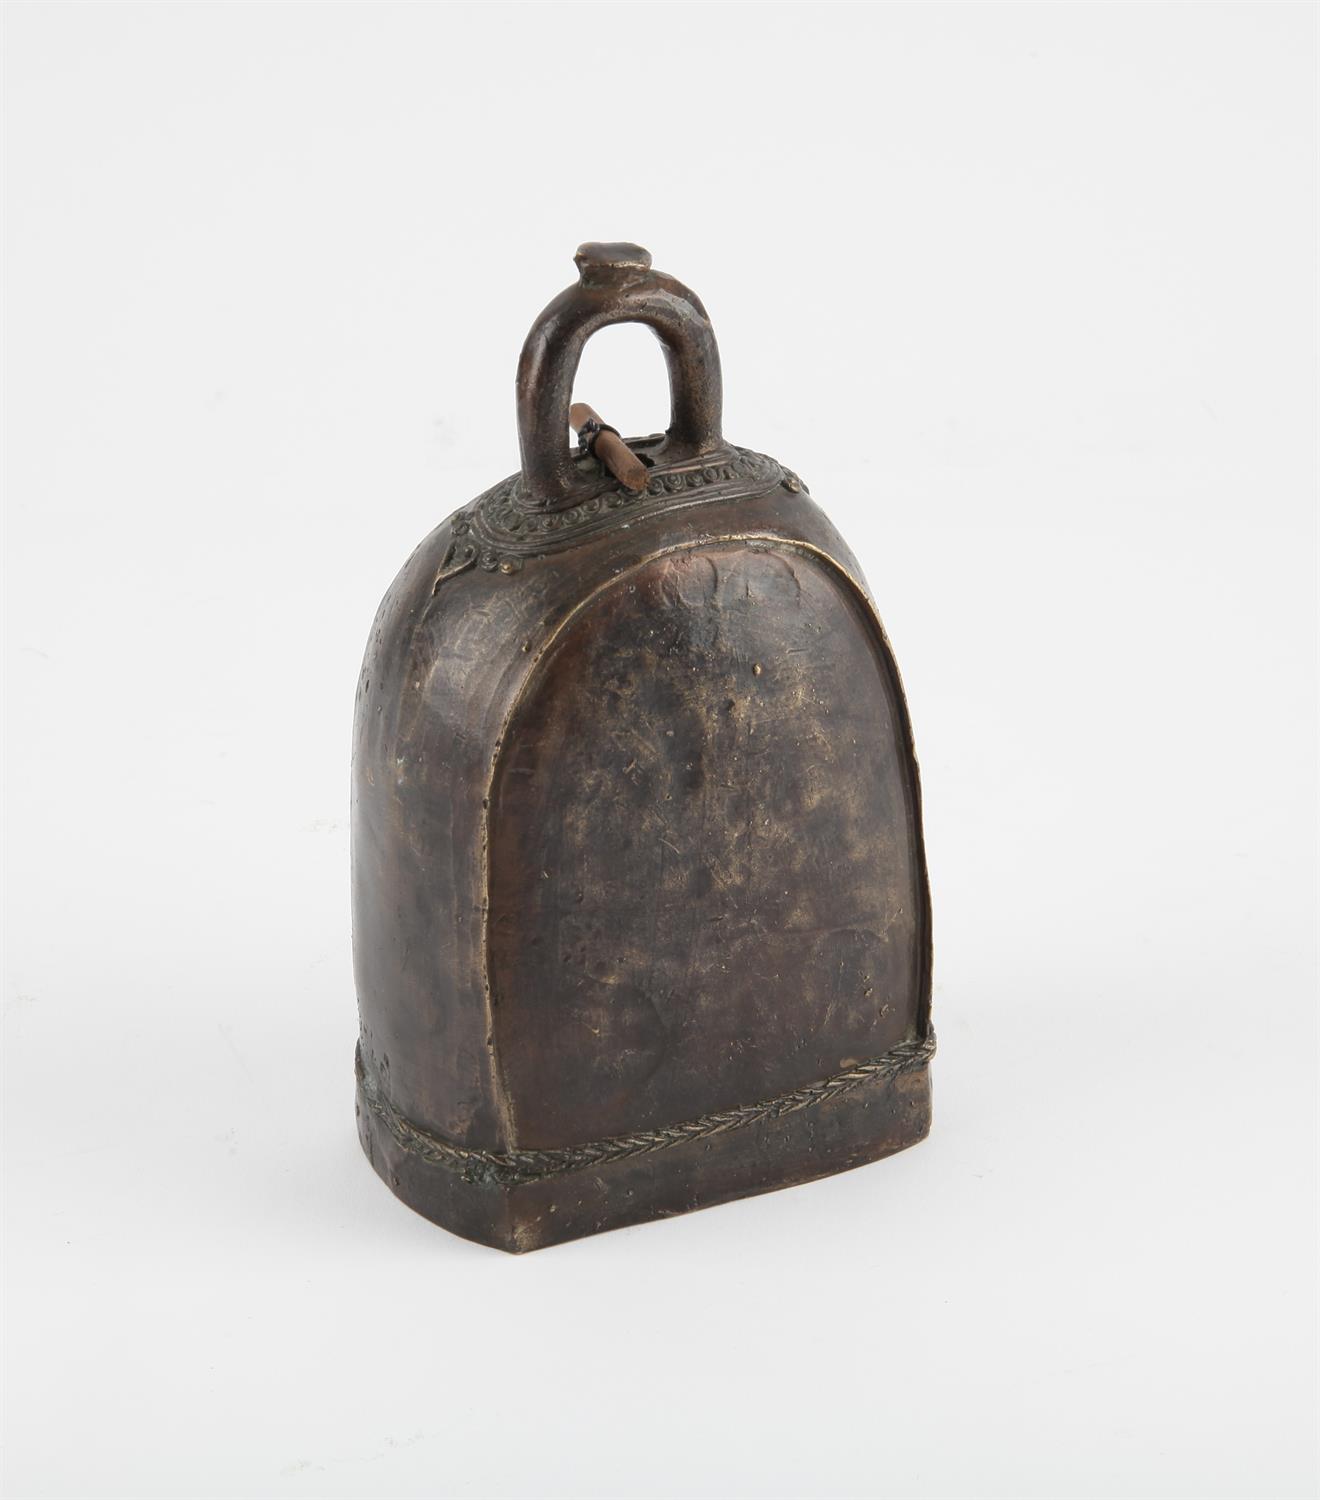 A Tibetan Bronze Temple Bell, late 19th century or later. The bell was used to indicate the